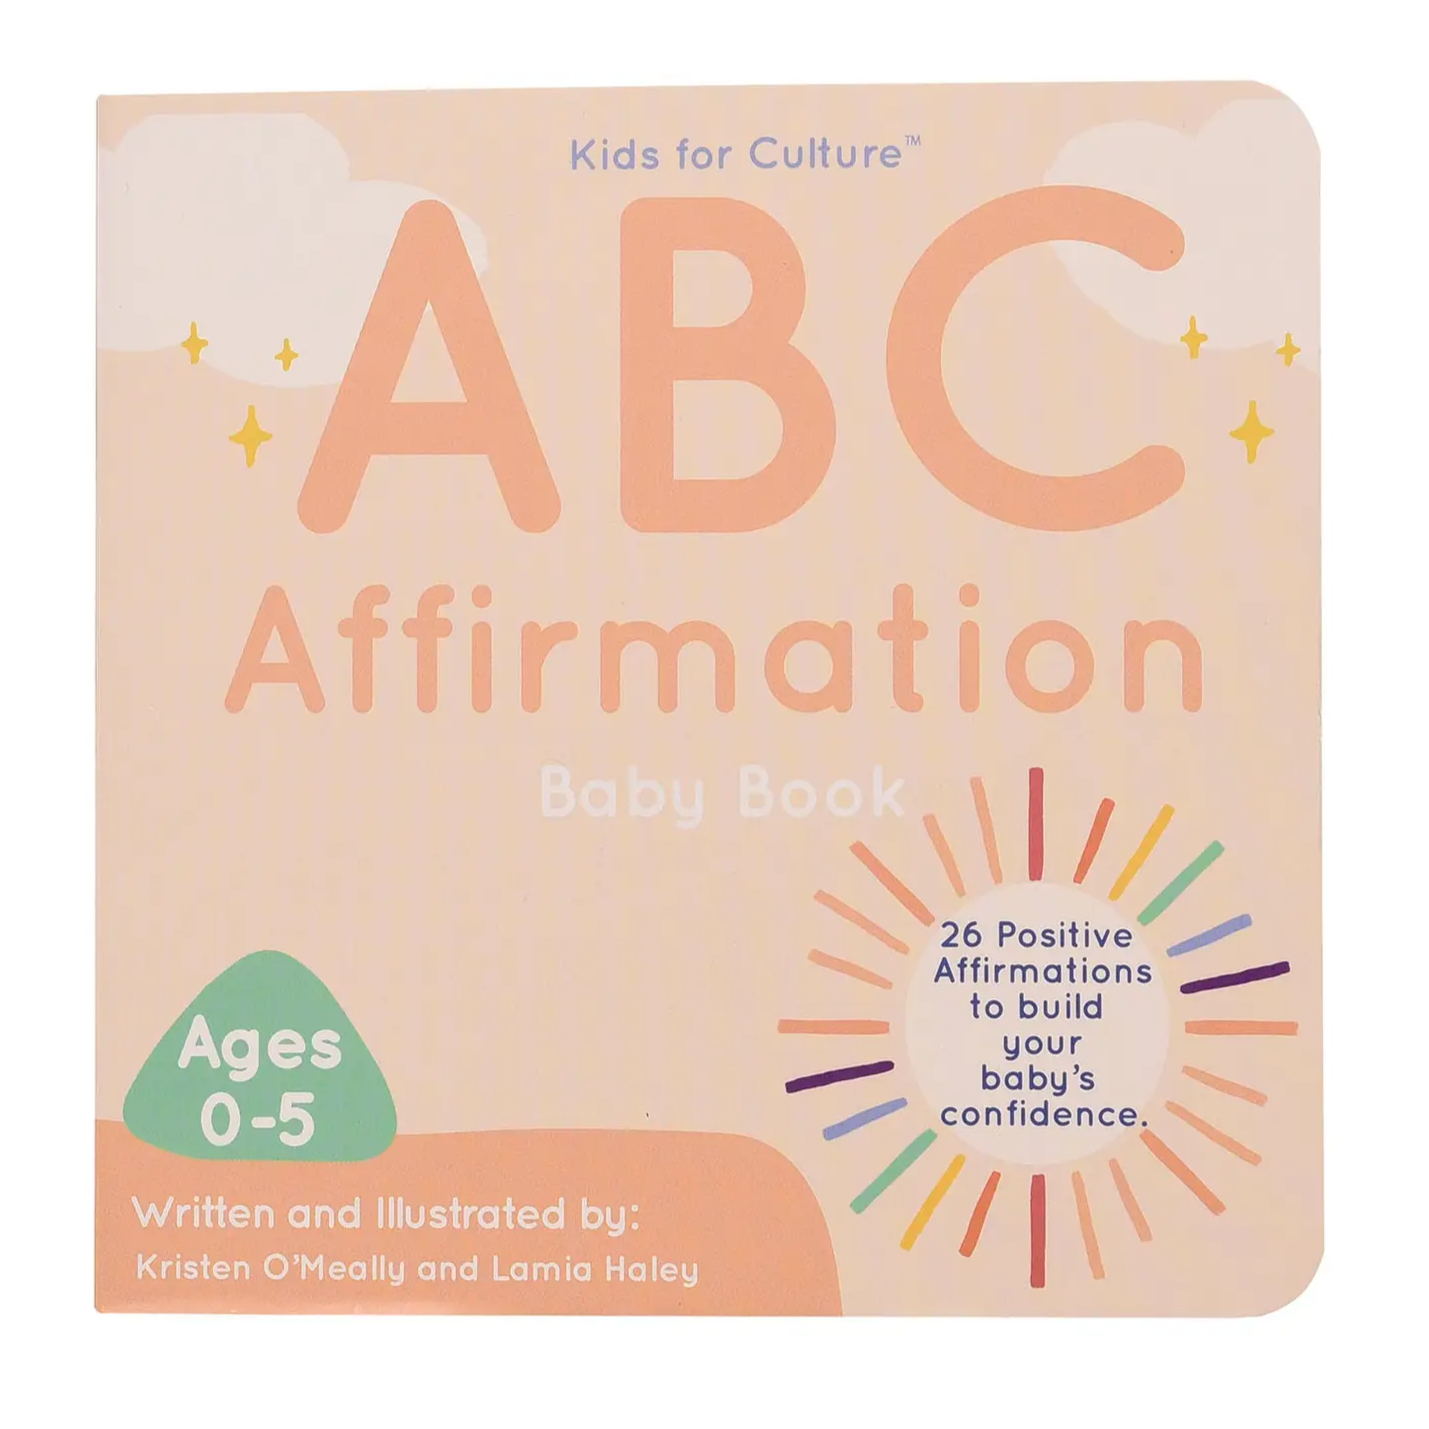 ABC Affirmation Baby Book - Kids for Culture